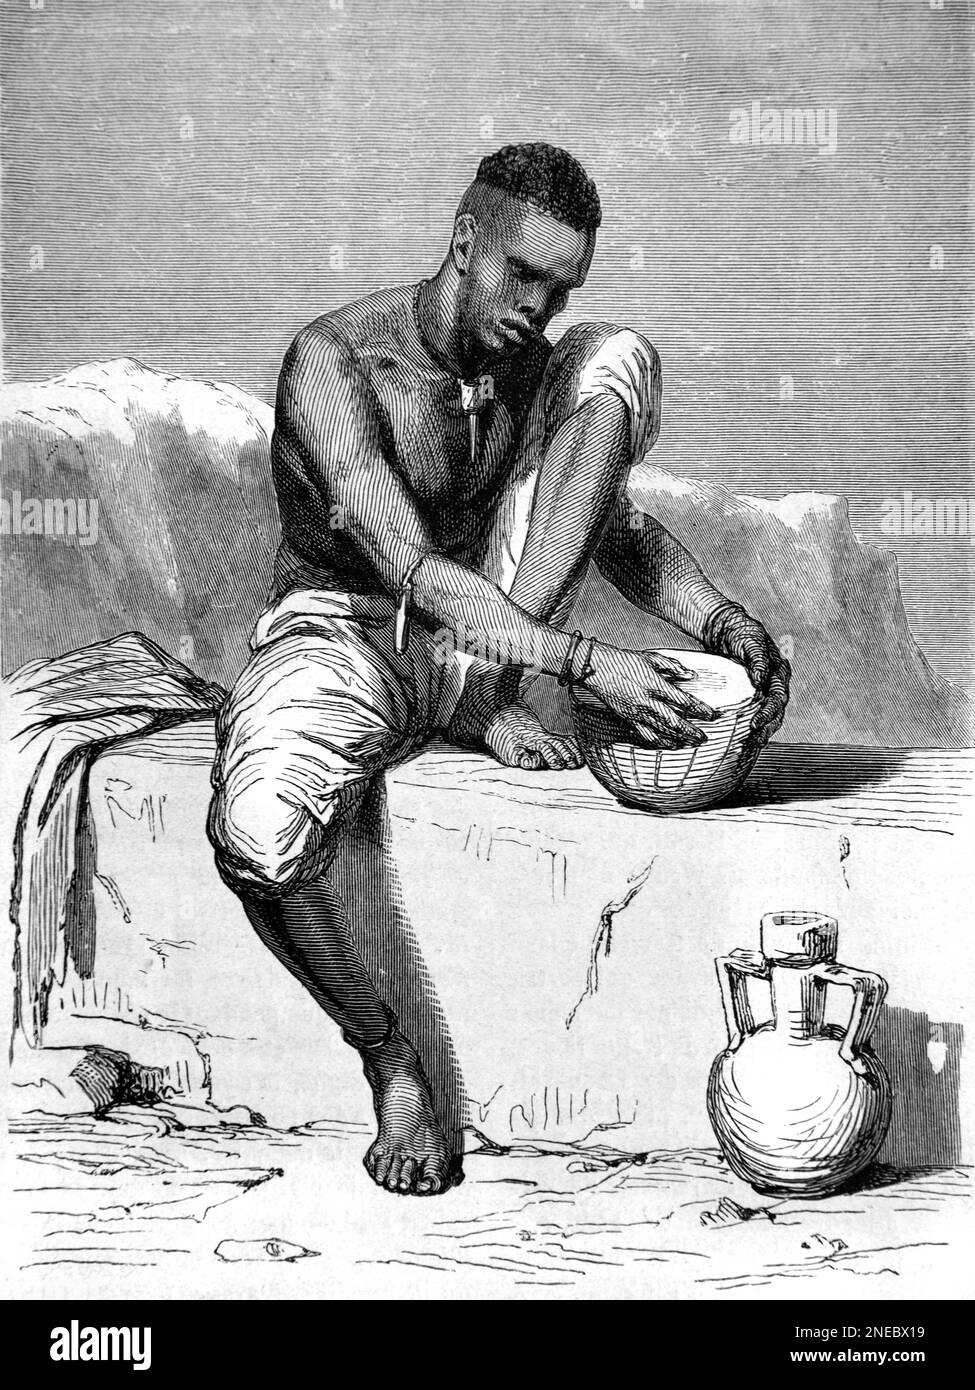 Dinka Man or Tribesman Repairing a Drum. The Dinka Tribe are a Nilotic People Mainly Living in South Sudan Africa. Vintage Engraving or Illustration 1862 Stock Photo